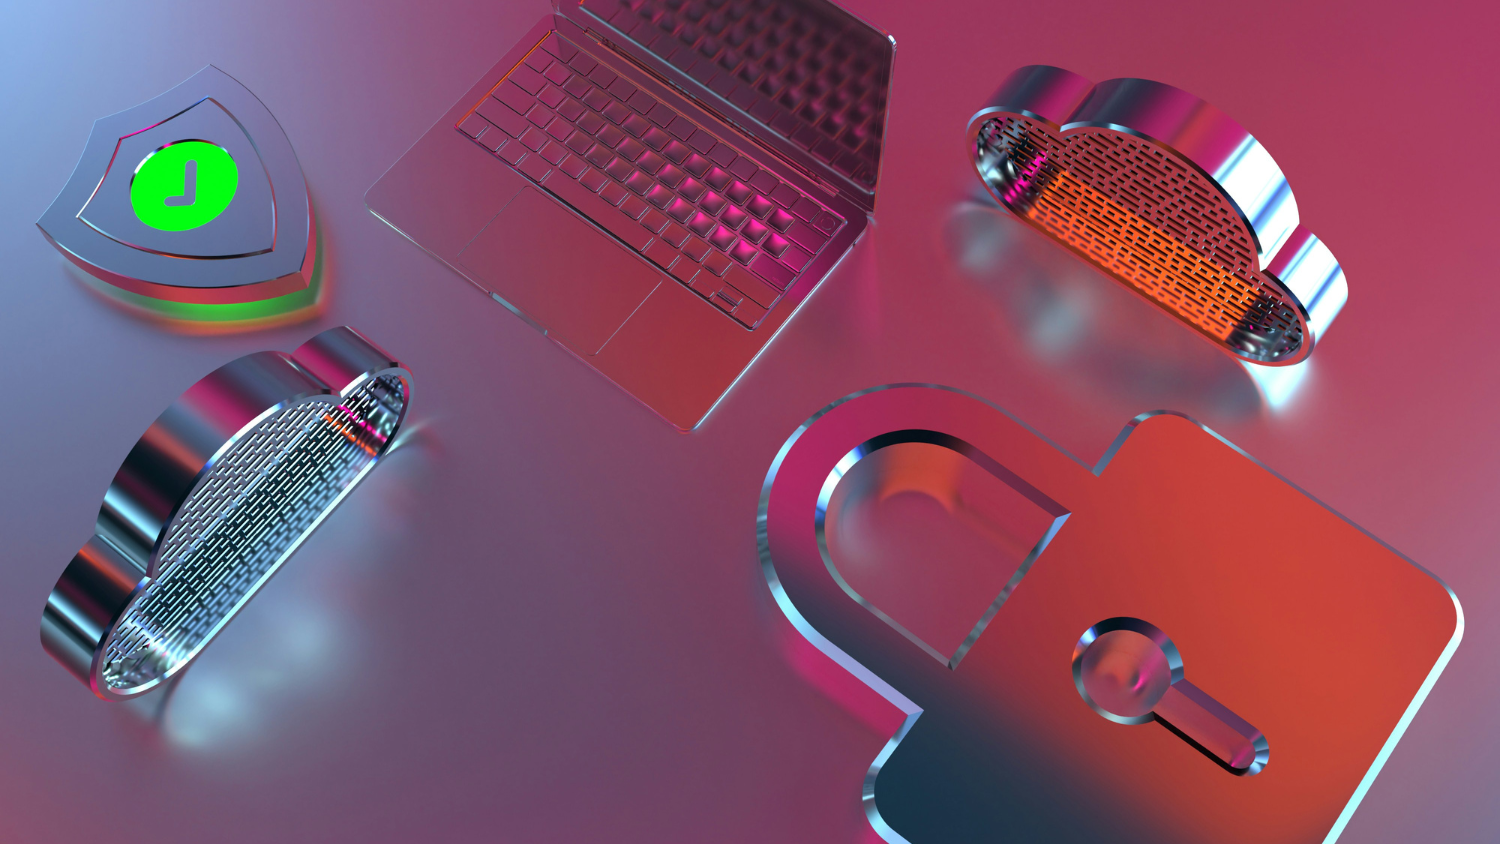 3D image of a lock and laptop